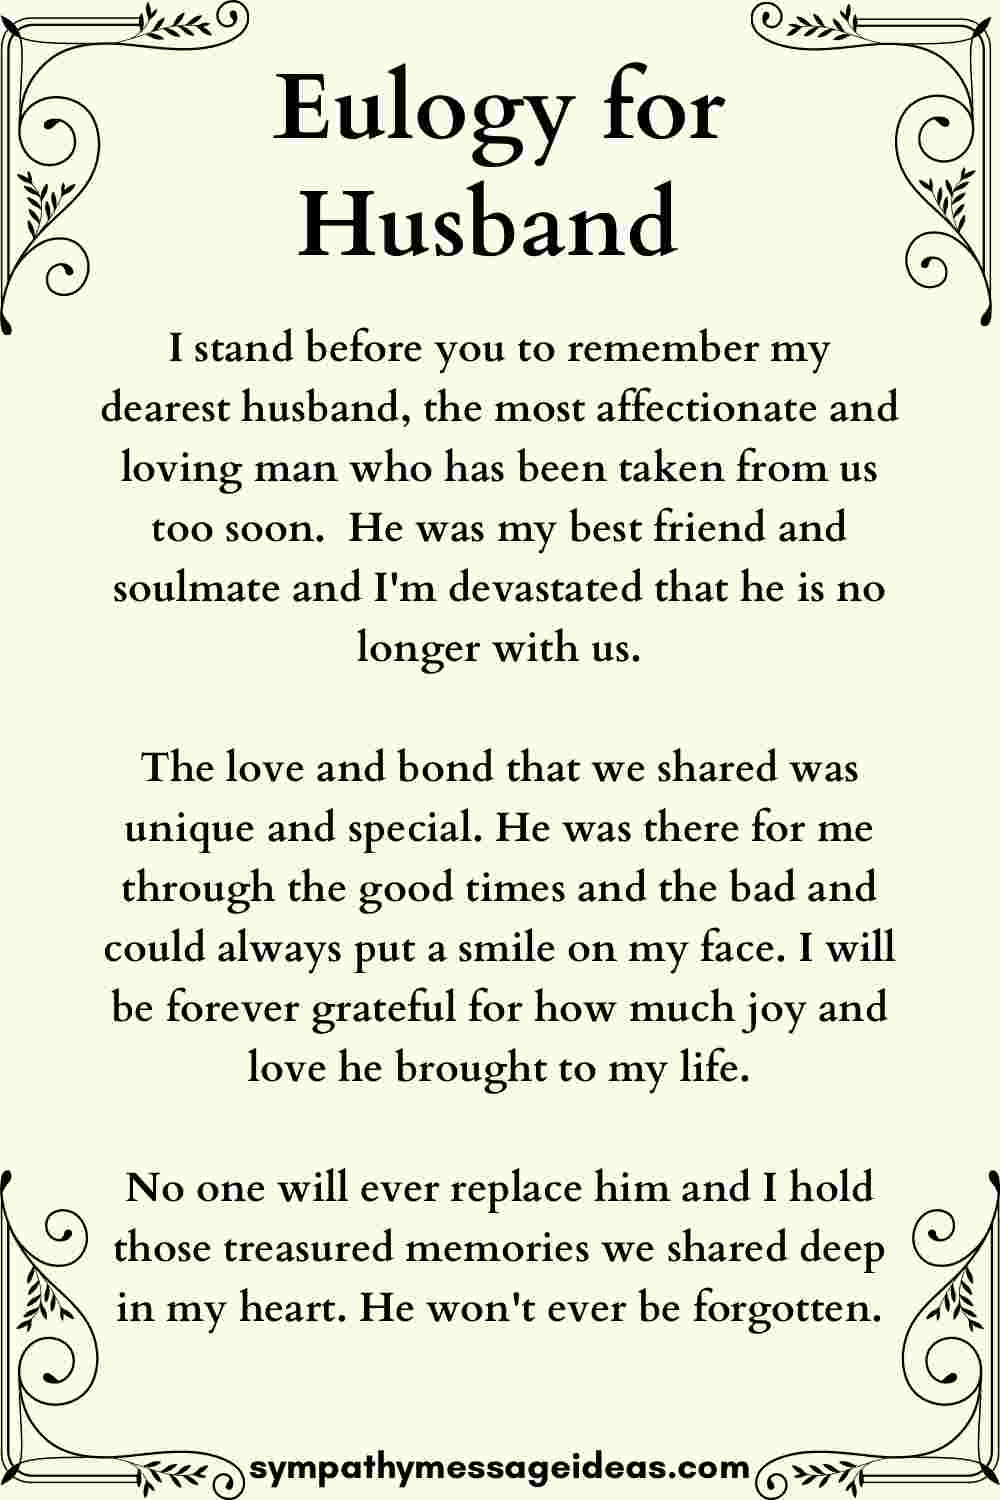 example eulogy for a husband